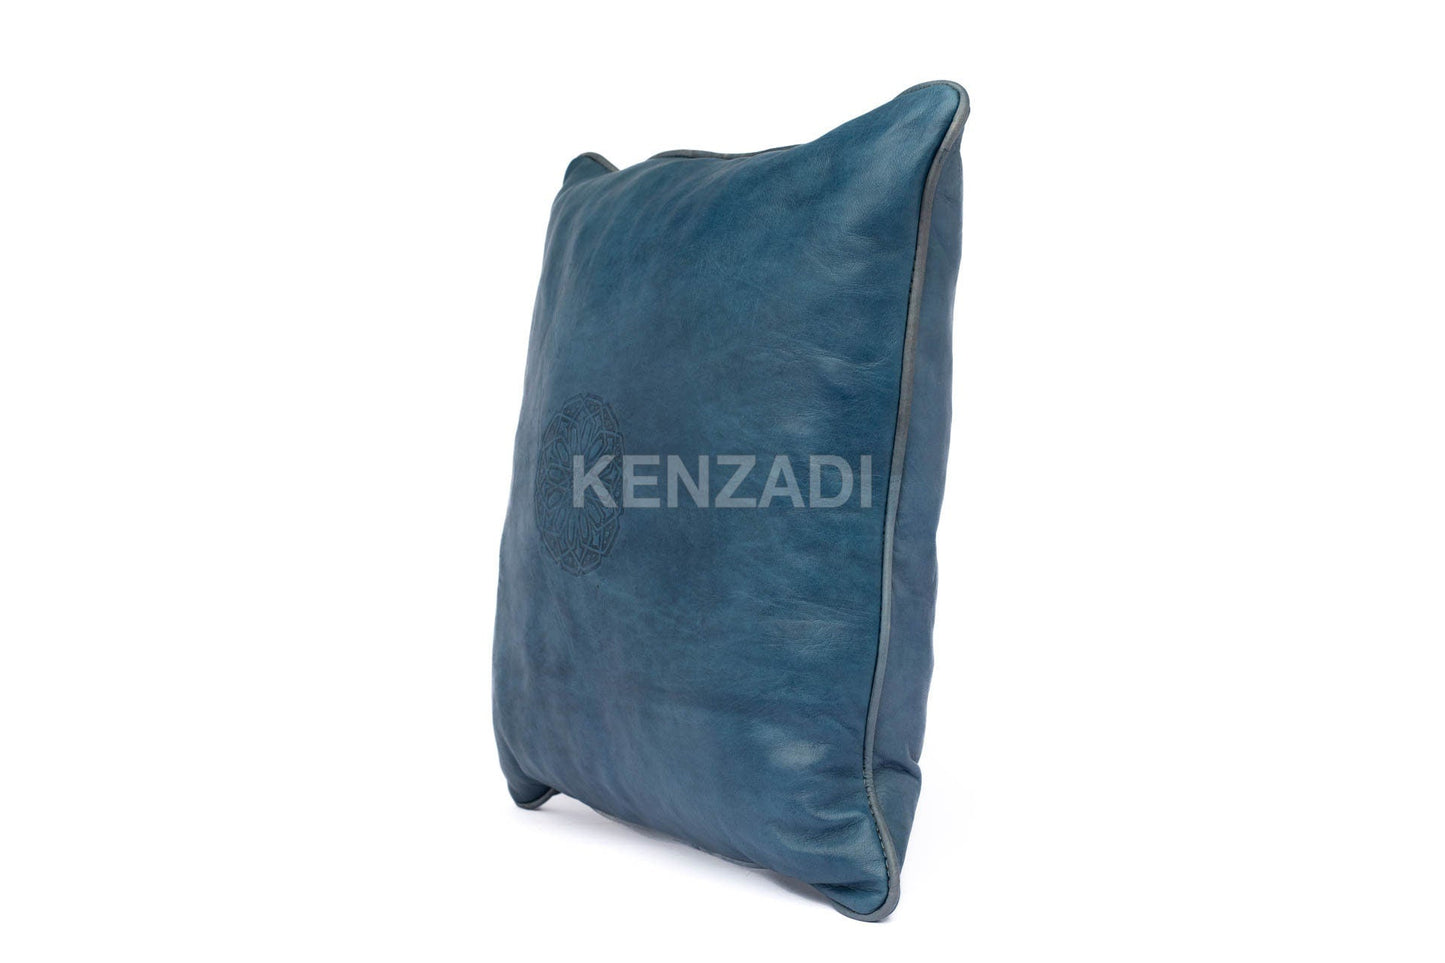 Moroccan Leather Pillow, Blue Jeans traditional Throw Pillow Case by Kenzadi - Handmade by My Poufs